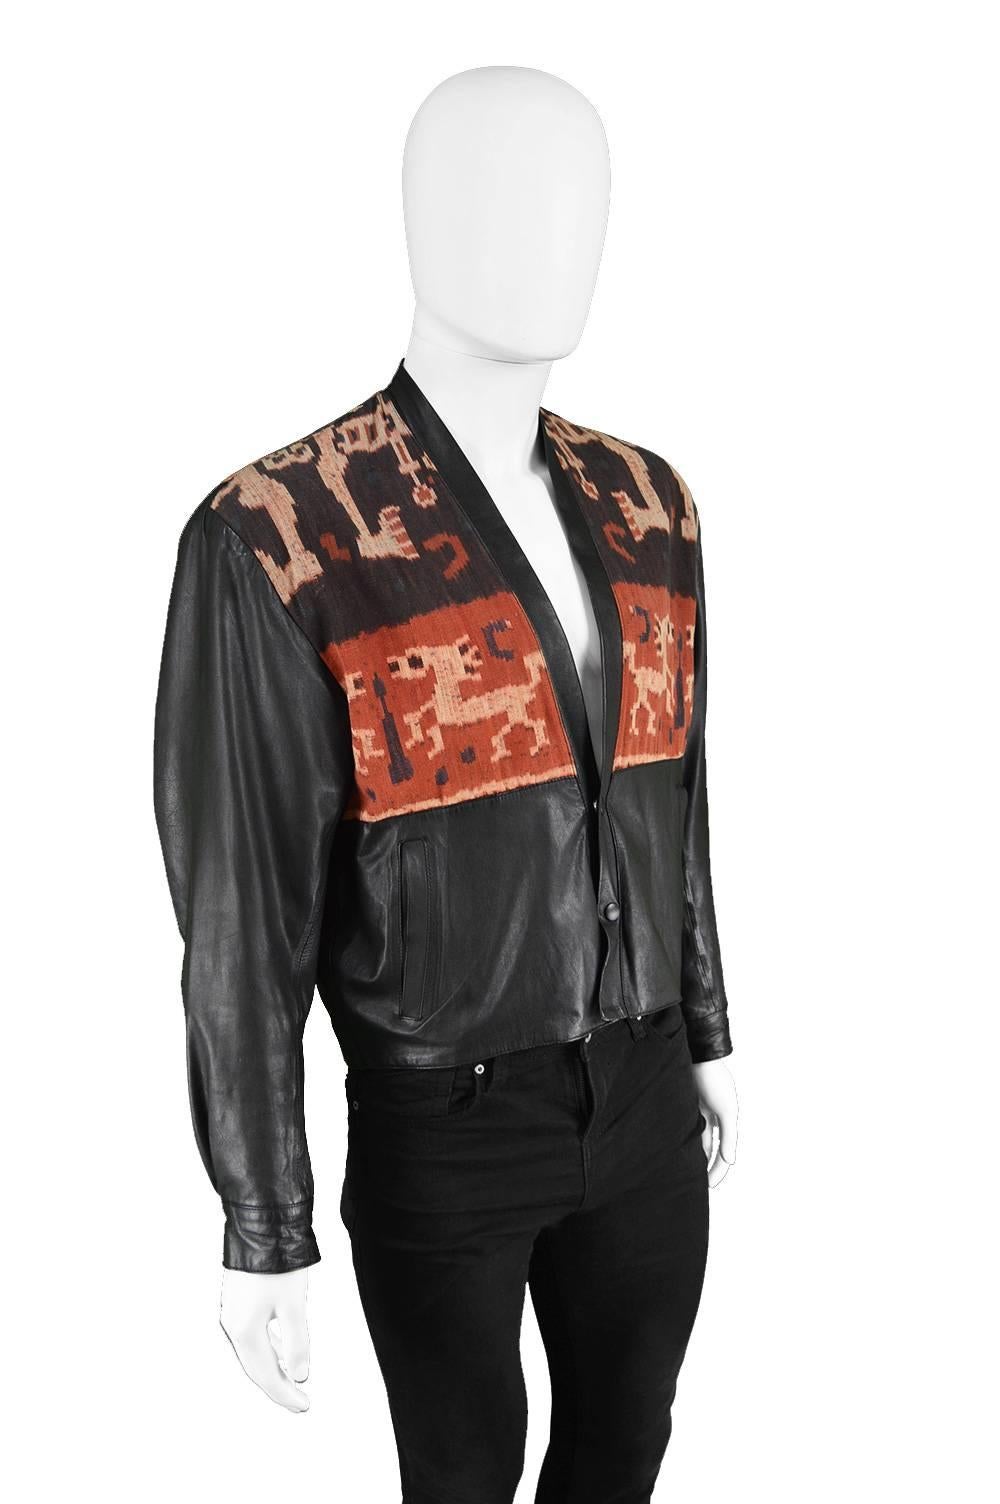 Black Abrasive Aorta Men's Vintage Leather and Handwoven Ikat Tapestry Jacket, 1980s For Sale